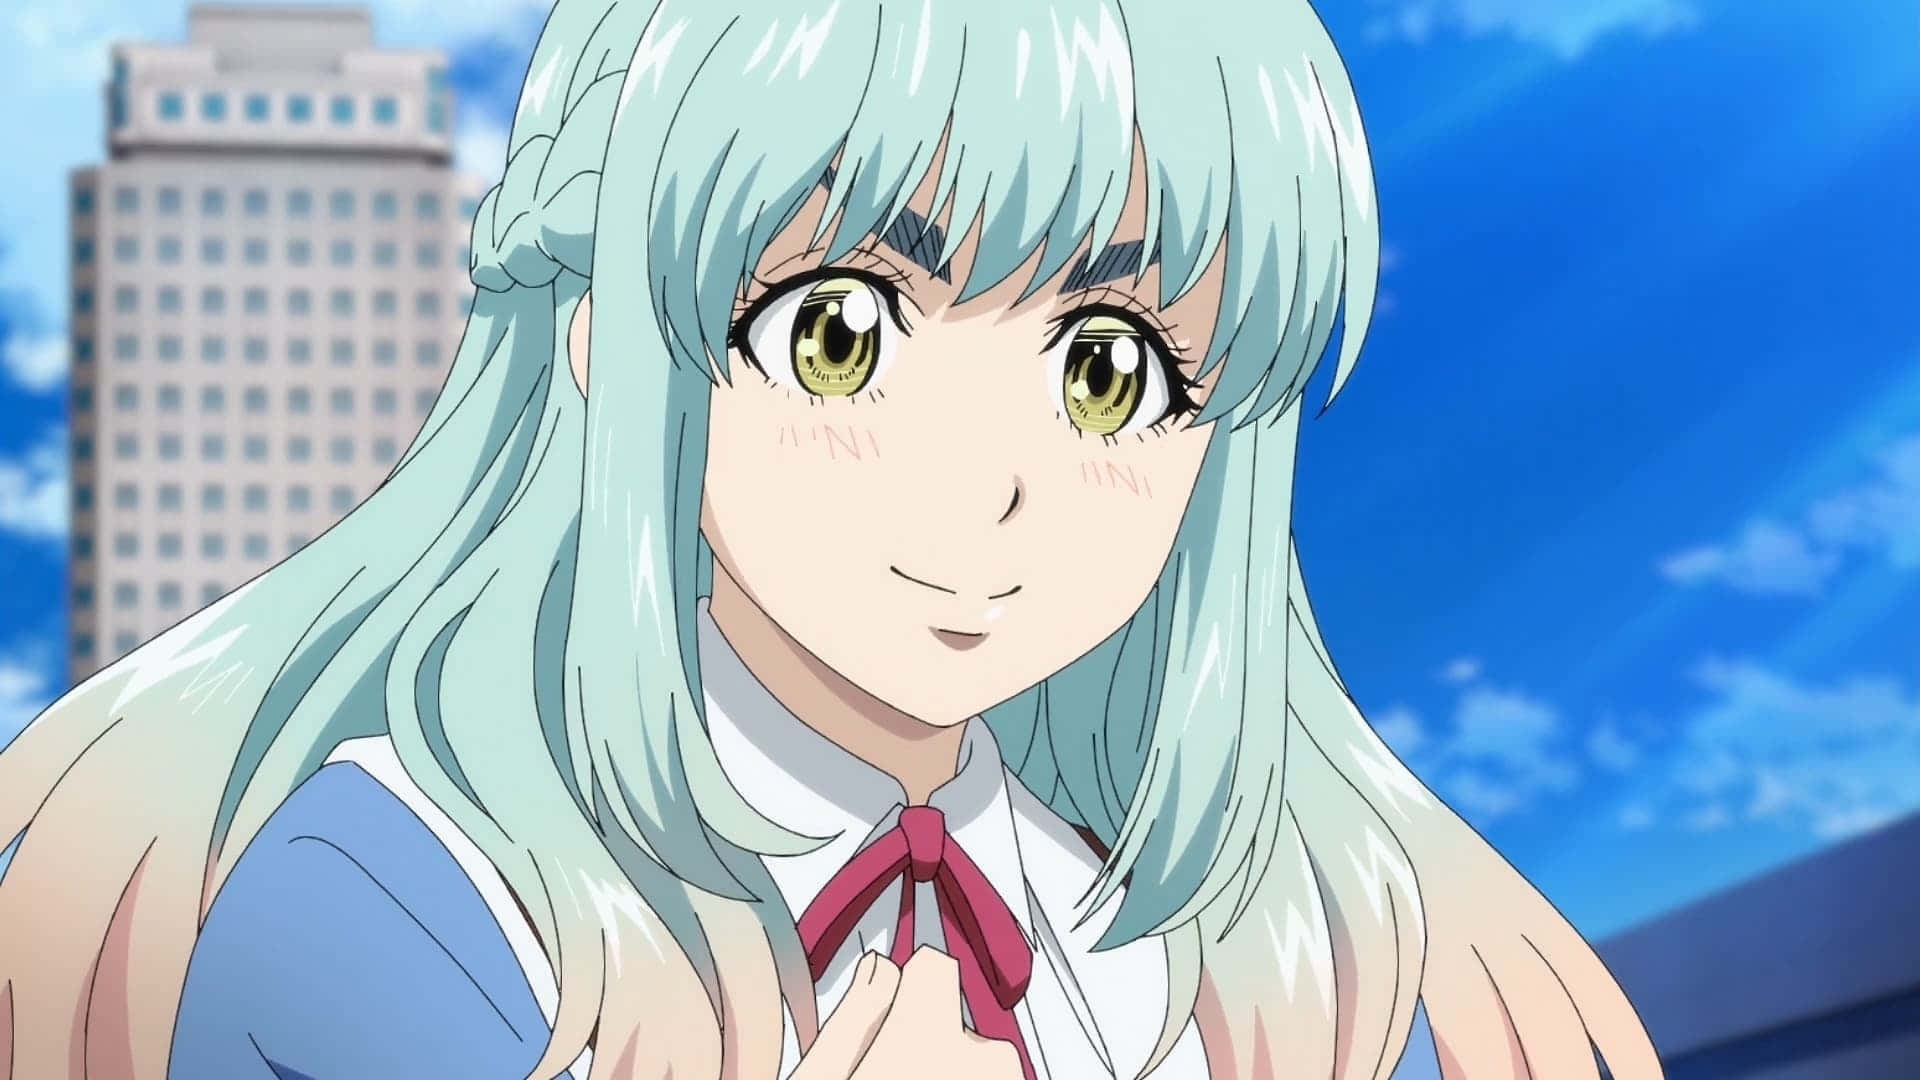 A Girl With Blue Hair And A Tie